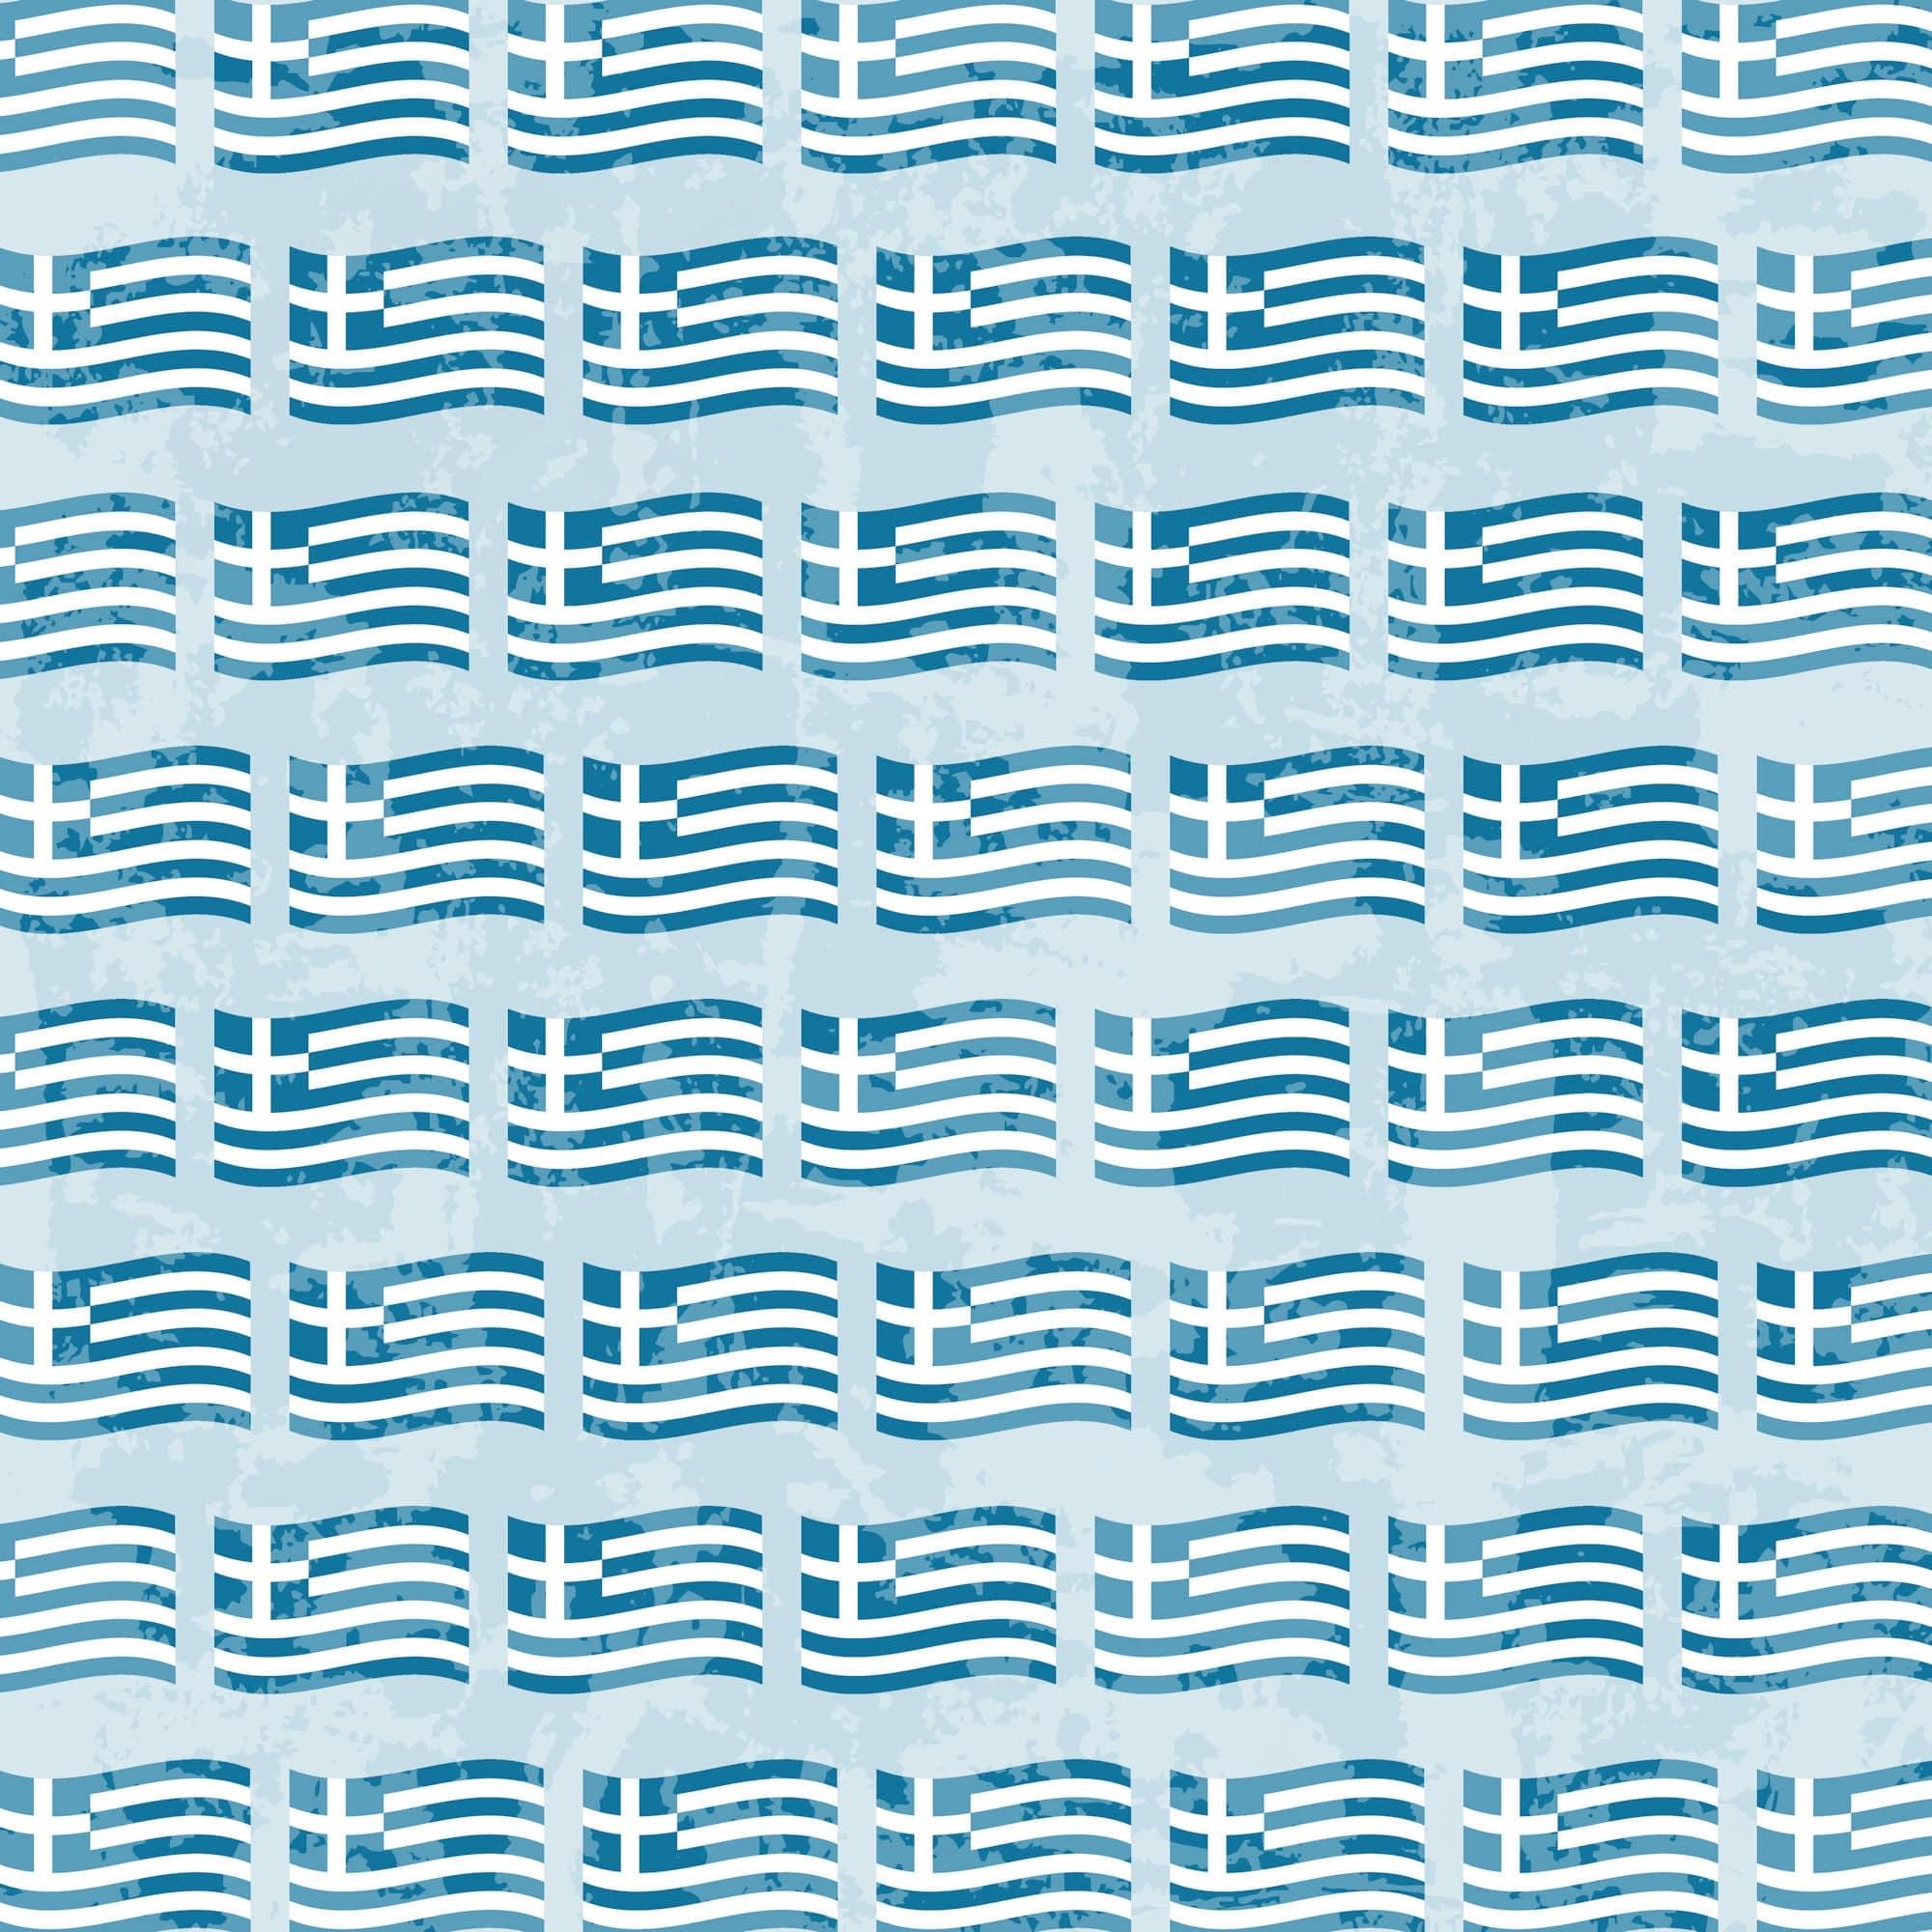 Greece Collection Mykonos 12 x 12 Double-Sided Scrapbook Paper by SSC Designs - Scrapbook Supply Companies